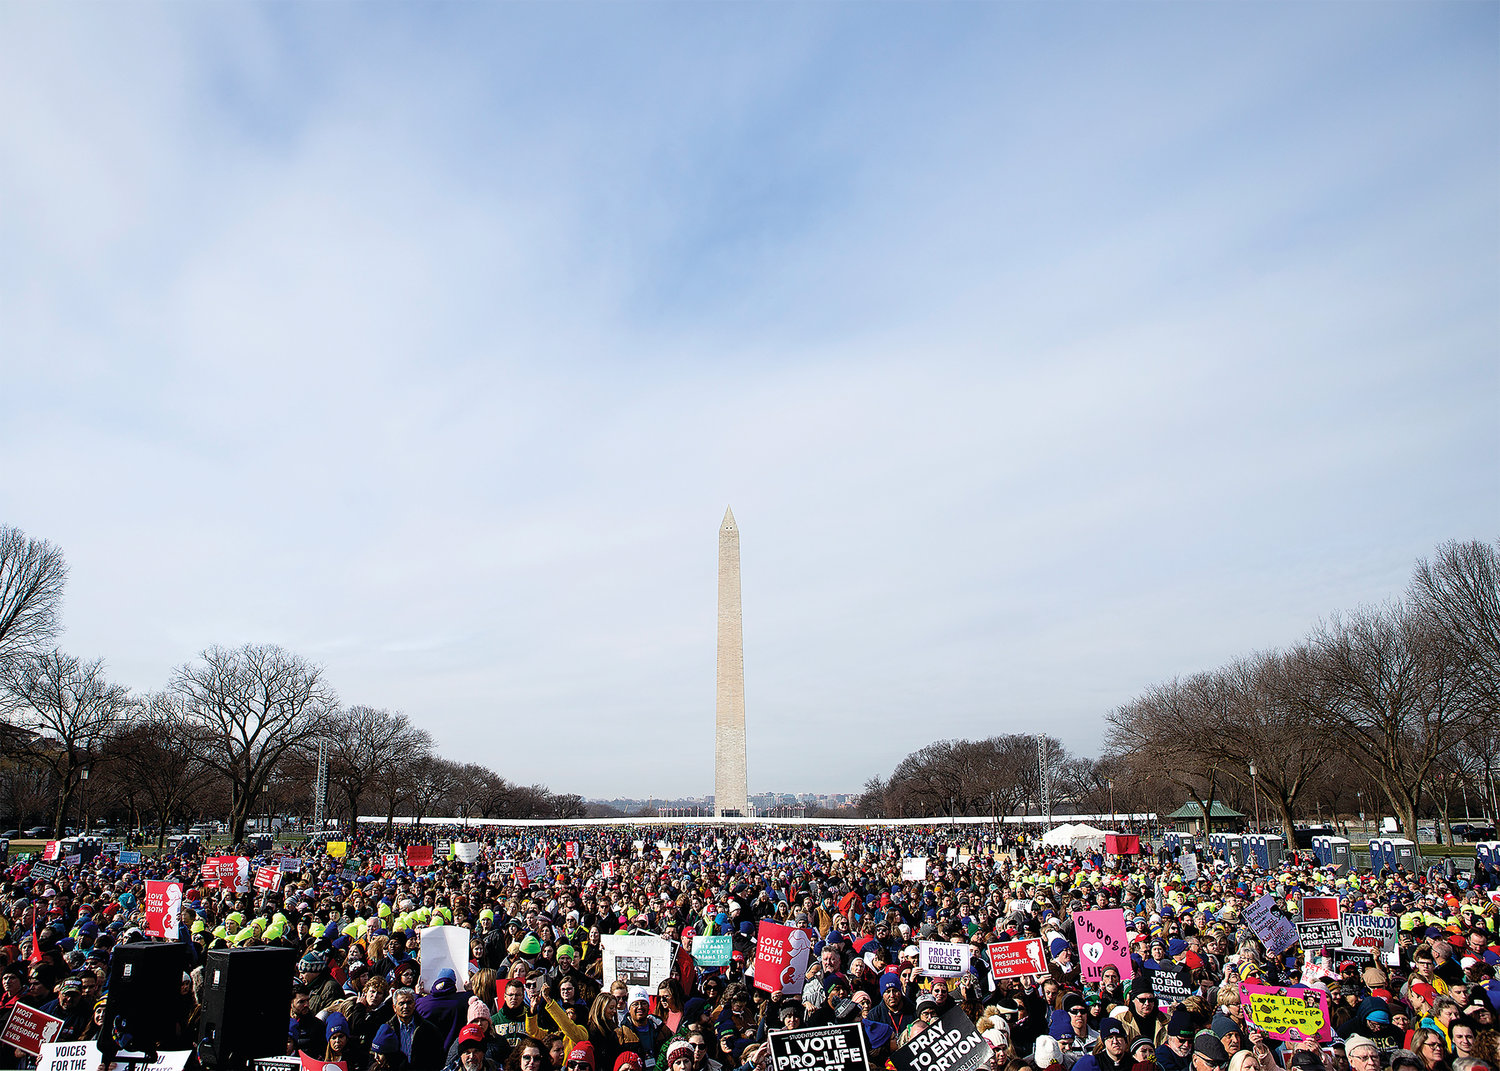 People gather during the annual March for Life rally in Washington Jan. 24, 2020. (CNS photo/Tyler Orsburn) See stories marked LIFE- Jan. 23 and 24, 2020.